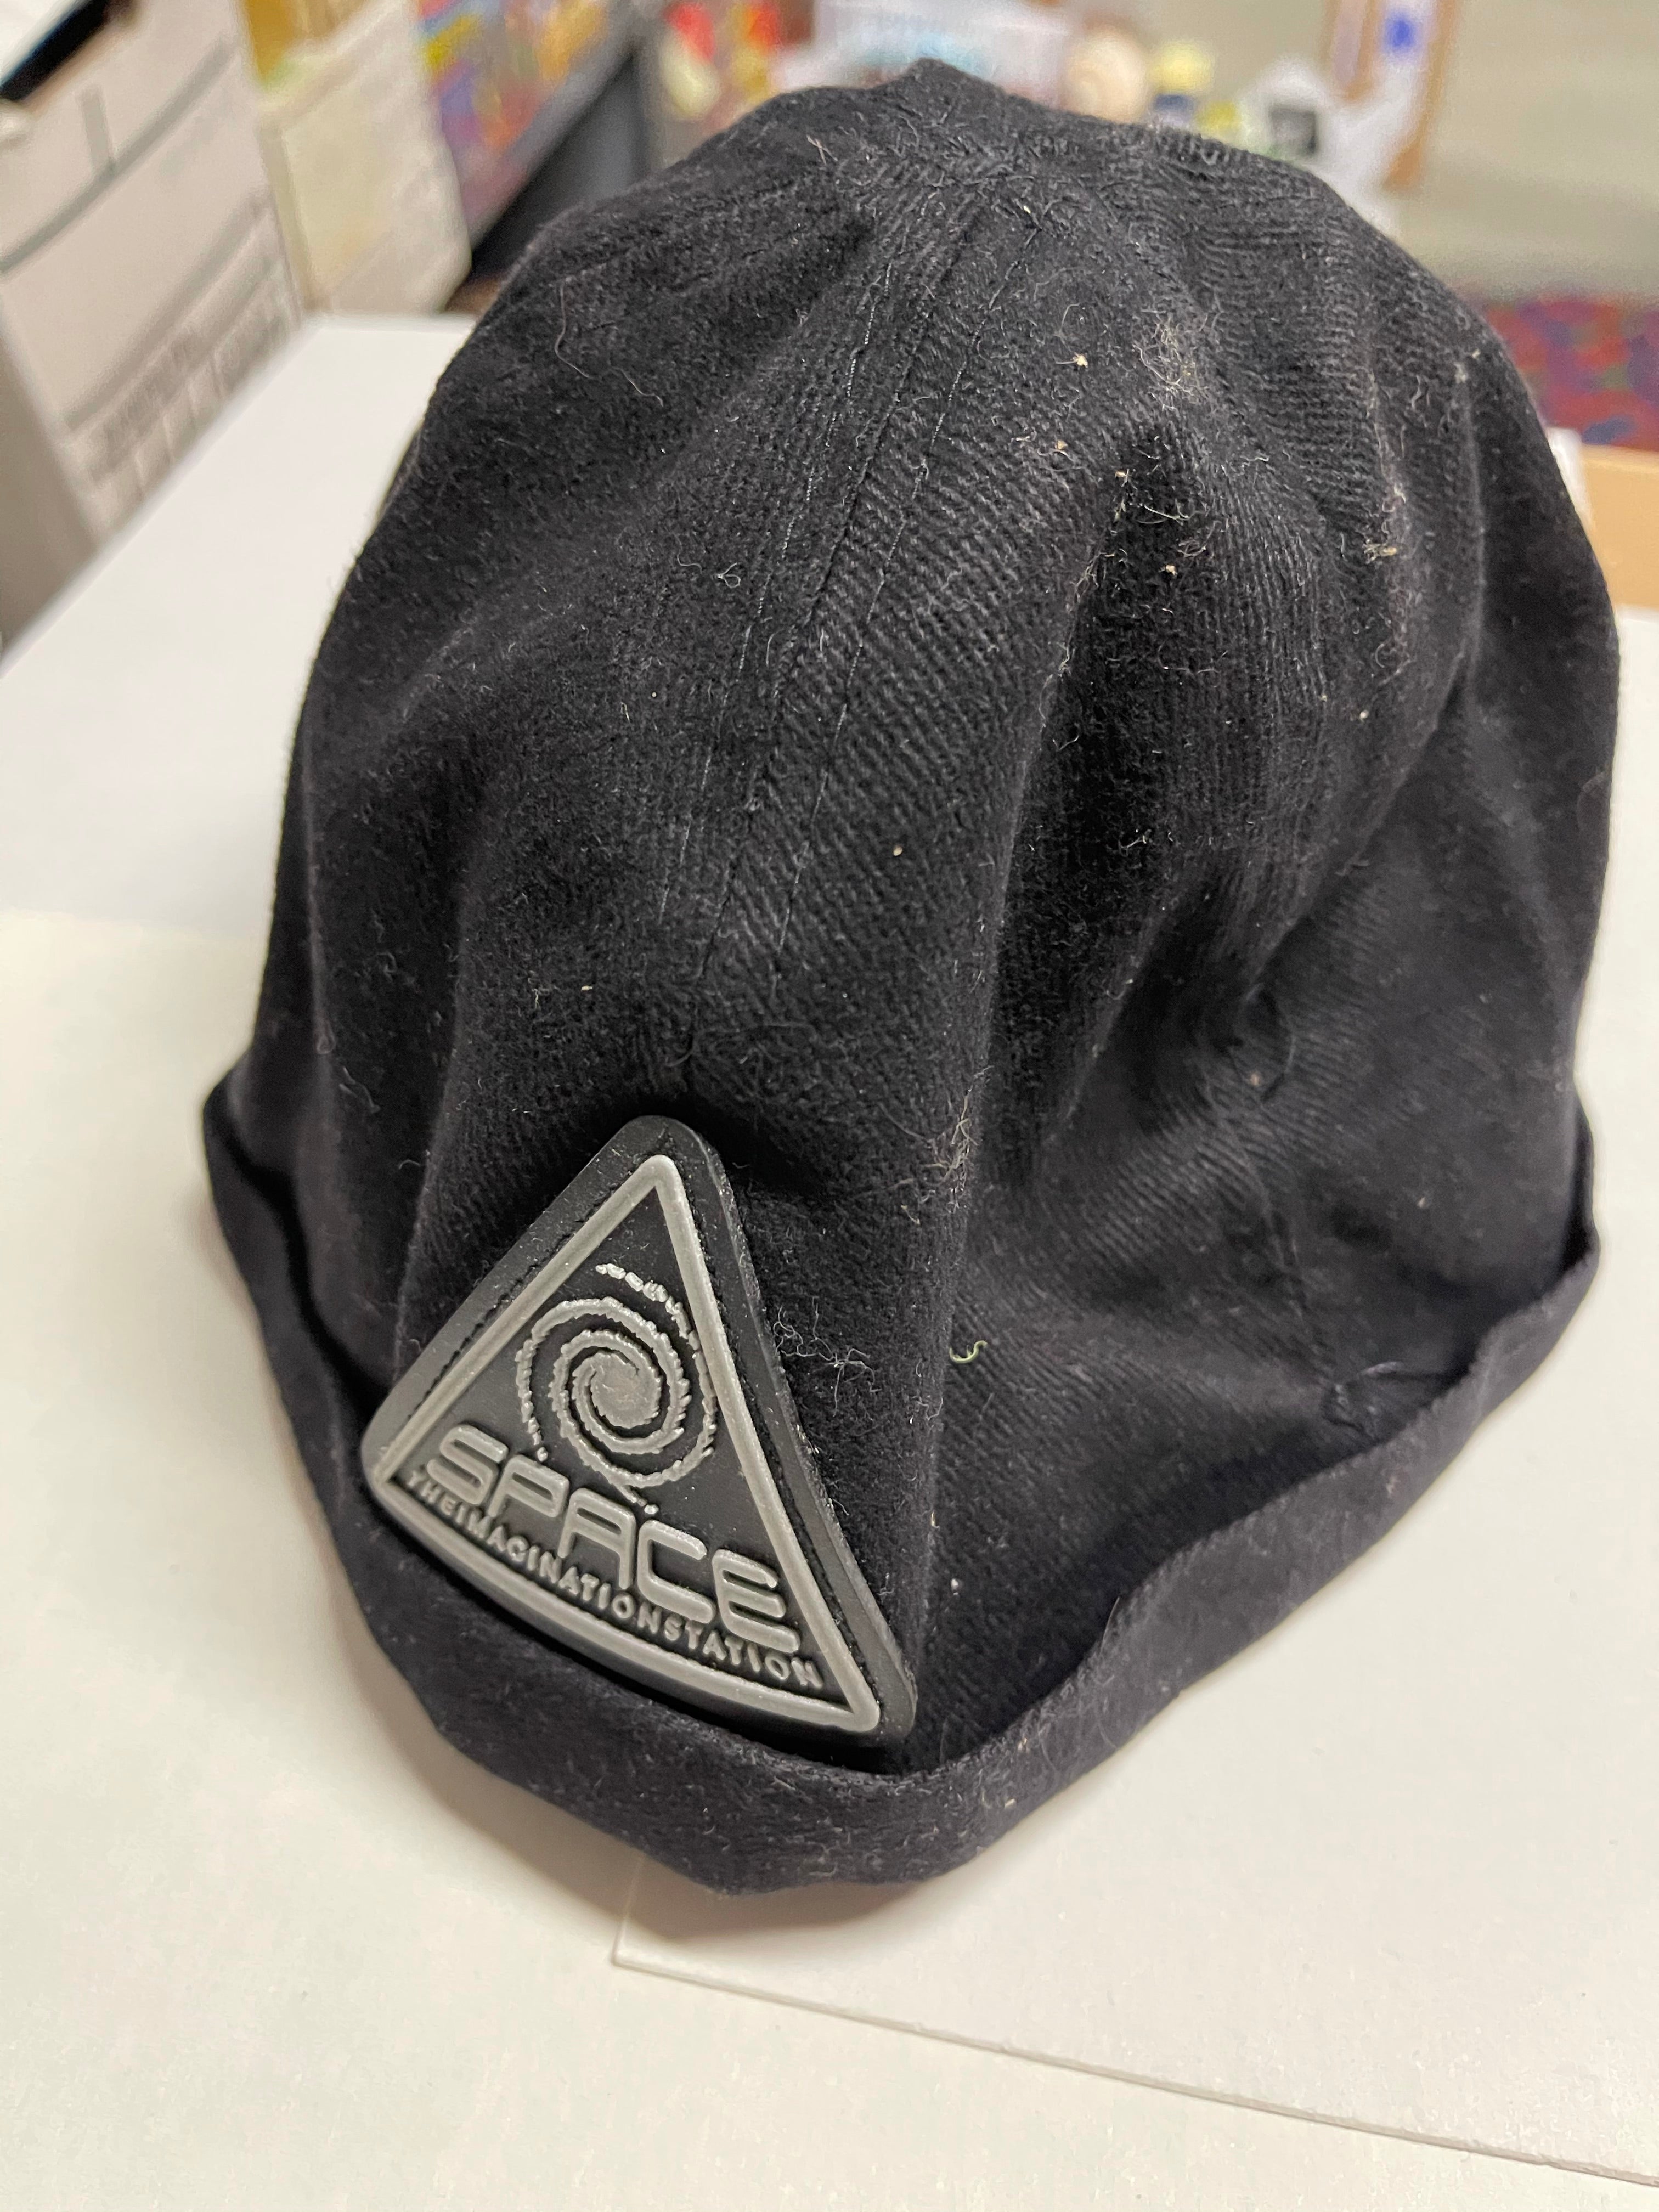 Space Channel rare early adjustable Touque hat 1990s